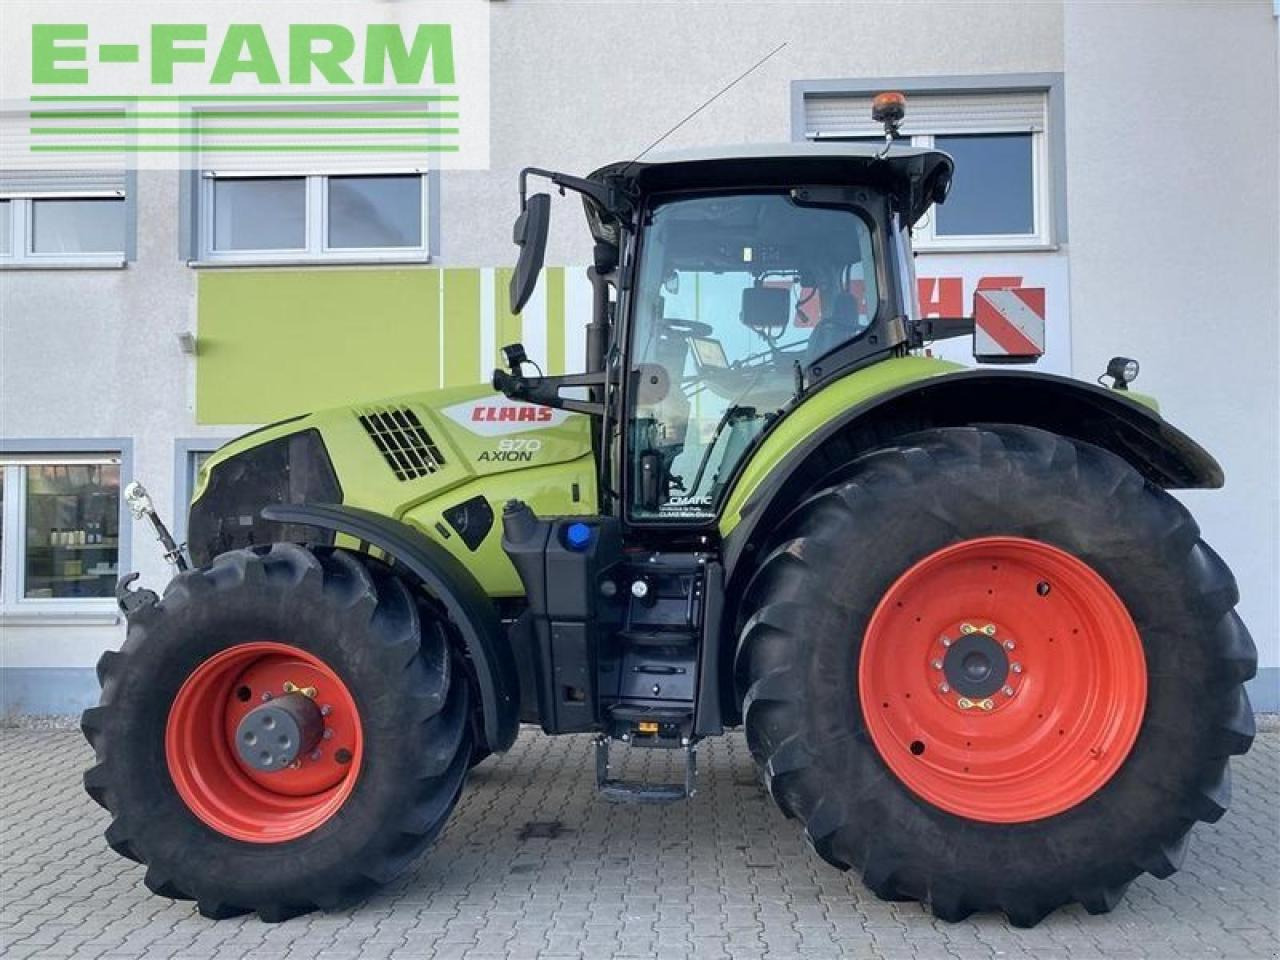 Farm tractor CLAAS axion 870 cmatic-stage v cebis: picture 3